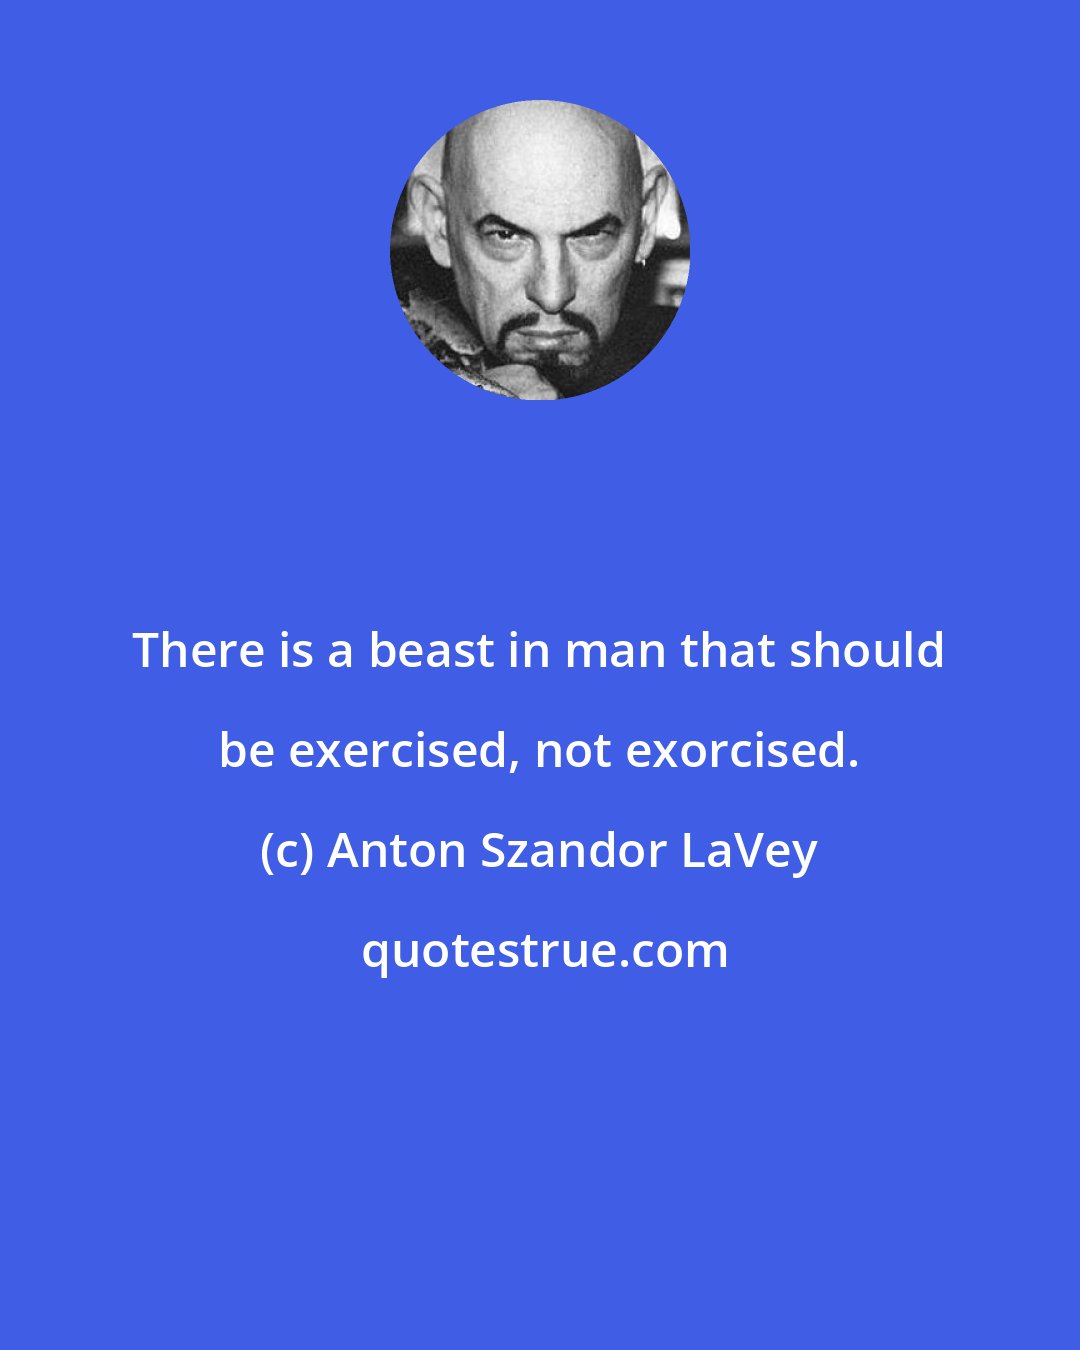 Anton Szandor LaVey: There is a beast in man that should be exercised, not exorcised.